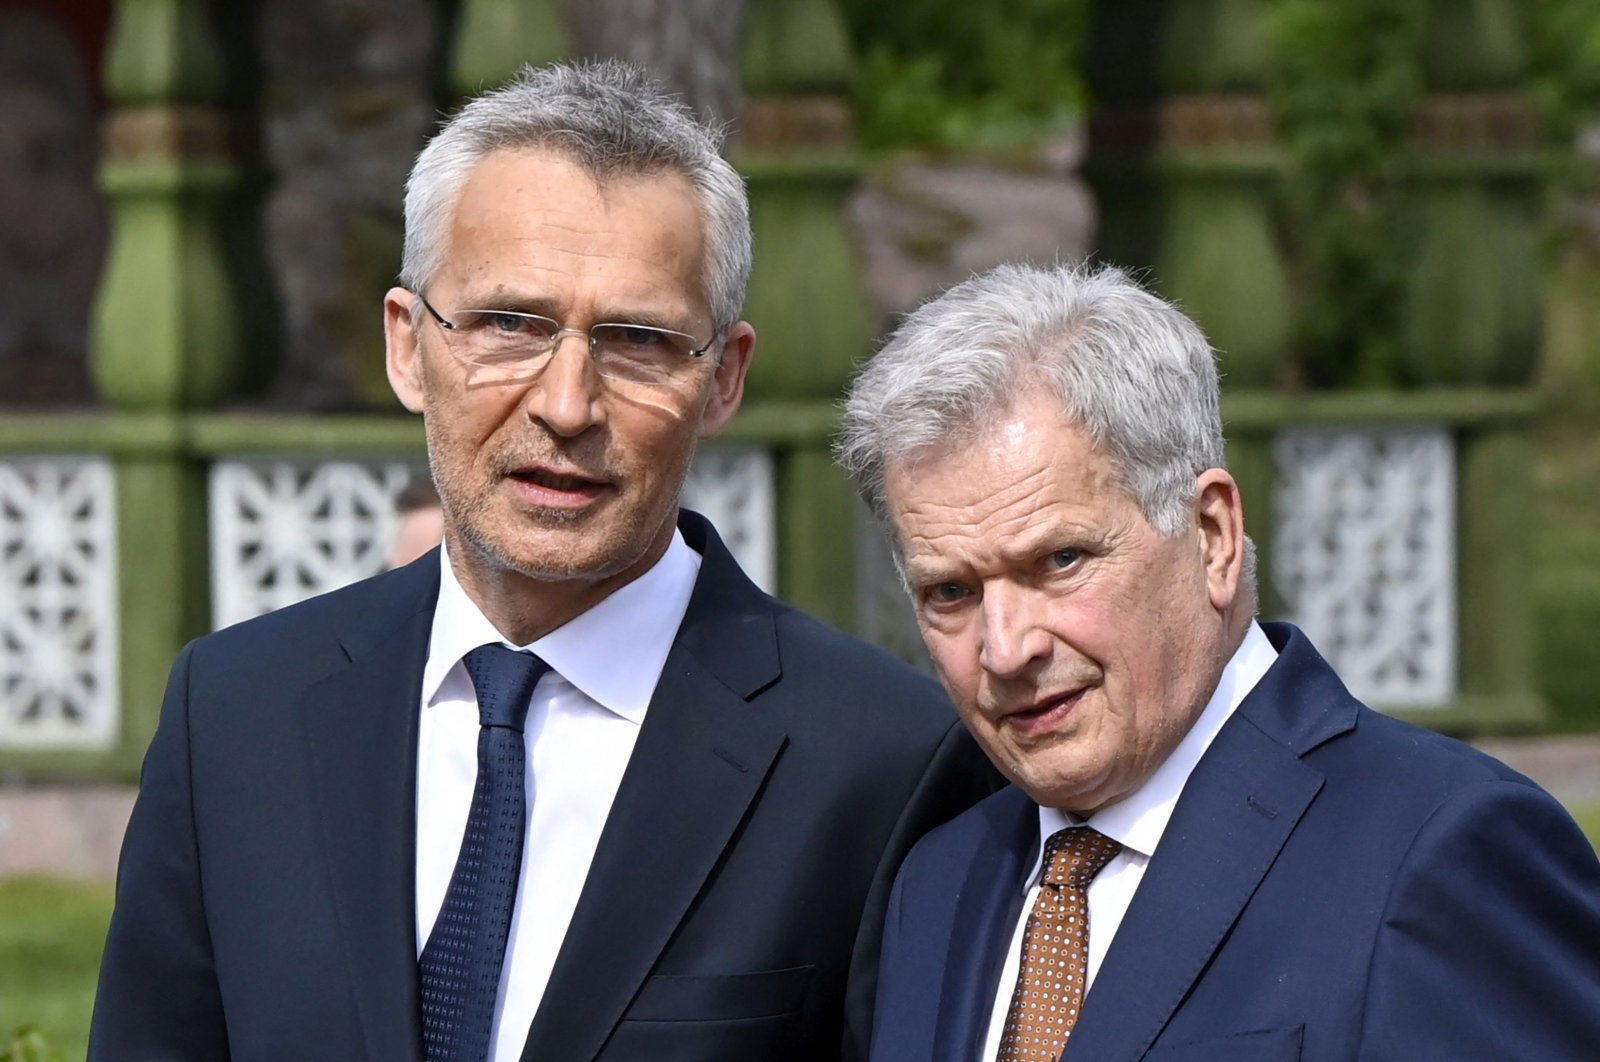 Finnish President Sauli Niinistِ (R) and NATO Secretary-General Jens Stoltenberg are pictured during the Kultaranta Talks hosted by the Finnish president at the presidential summer residence Kultaranta in Naantali, Finland, June 12, 2022. (AFP Photo)